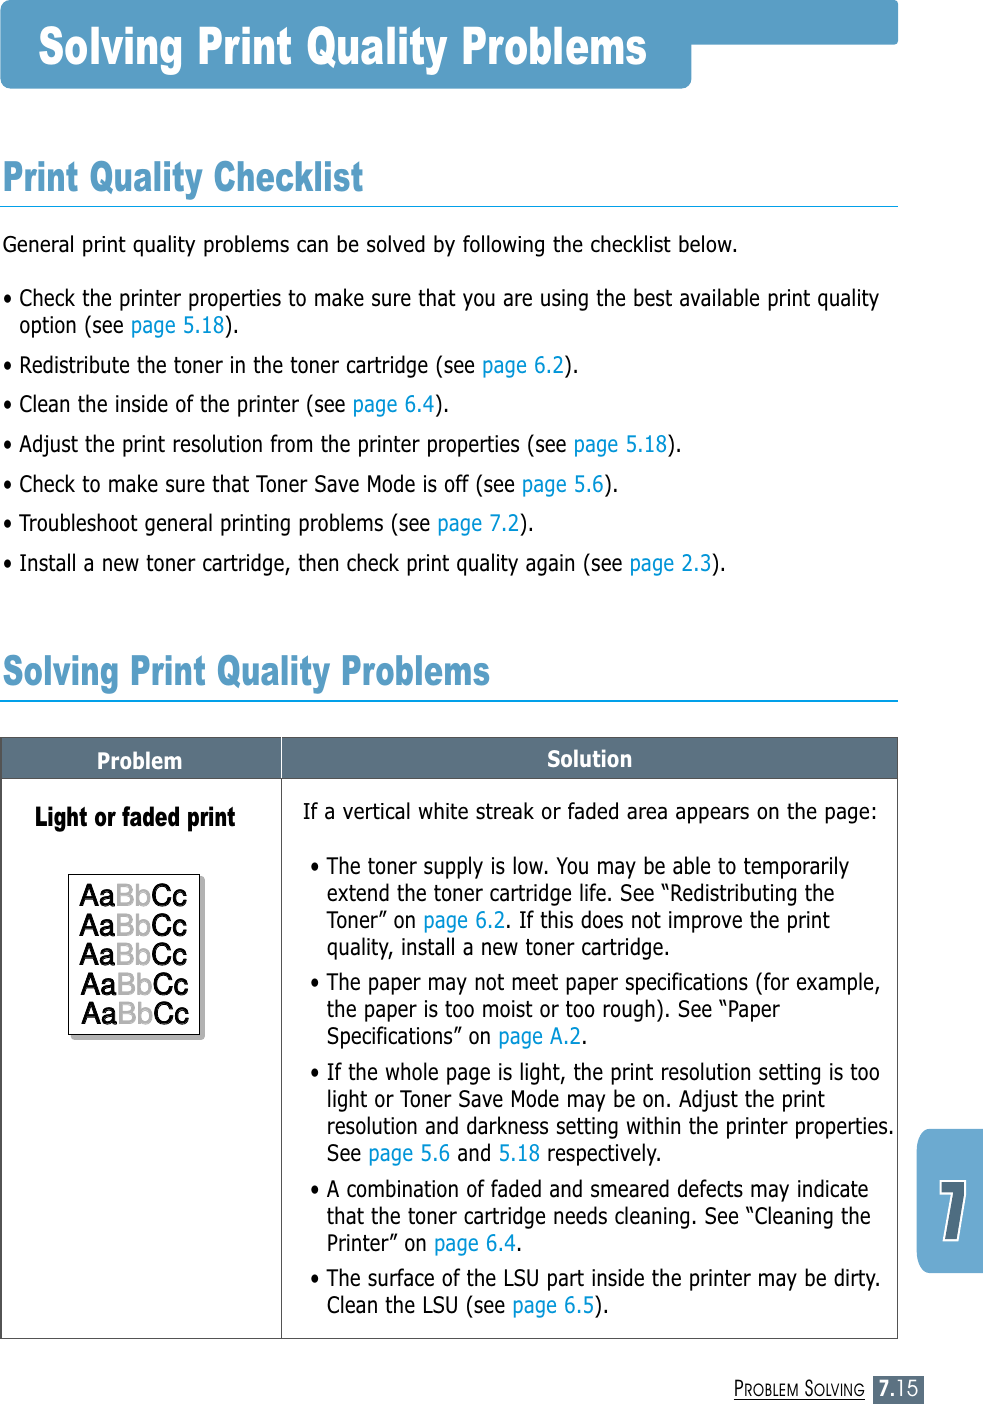 7.15PROBLEM SOLVINGProblem SolutionSolving Print Quality ProblemsGeneral print quality problems can be solved by following the checklist below.• Check the printer properties to make sure that you are using the best available print qualityoption (see page 5.18).• Redistribute the toner in the toner cartridge (see page 6.2).• Clean the inside of the printer (see page 6.4).• Adjust the print resolution from the printer properties (see page 5.18).• Check to make sure that Toner Save Mode is off (see page 5.6).• Troubleshoot general printing problems (see page 7.2).• Install a new toner cartridge, then check print quality again (see page 2.3). Print Quality ChecklistSolving Print Quality ProblemsIf a vertical white streak or faded area appears on the page:• The toner supply is low. You may be able to temporarilyextend the toner cartridge life. See “Redistributing theToner” on page 6.2. If this does not improve the printquality, install a new toner cartridge.• The paper may not meet paper specifications (for example,the paper is too moist or too rough). See “PaperSpecifications” on page A.2.• If the whole page is light, the print resolution setting is toolight or Toner Save Mode may be on. Adjust the printresolution and darkness setting within the printer properties.See page 5.6 and 5.18 respectively.• A combination of faded and smeared defects may indicatethat the toner cartridge needs cleaning. See “Cleaning thePrinter” on page 6.4.• The surface of the LSU part inside the printer may be dirty.Clean the LSU (see page 6.5).Light or faded printAaAaBbBbCcCcAaAaBbBbCcCcAaAaBbBbCcCcAaAaBbBbCcCcAaAaBbBbCcCcAaBbCcAaBbCcAaBbCcAaBbCcAaBbCc